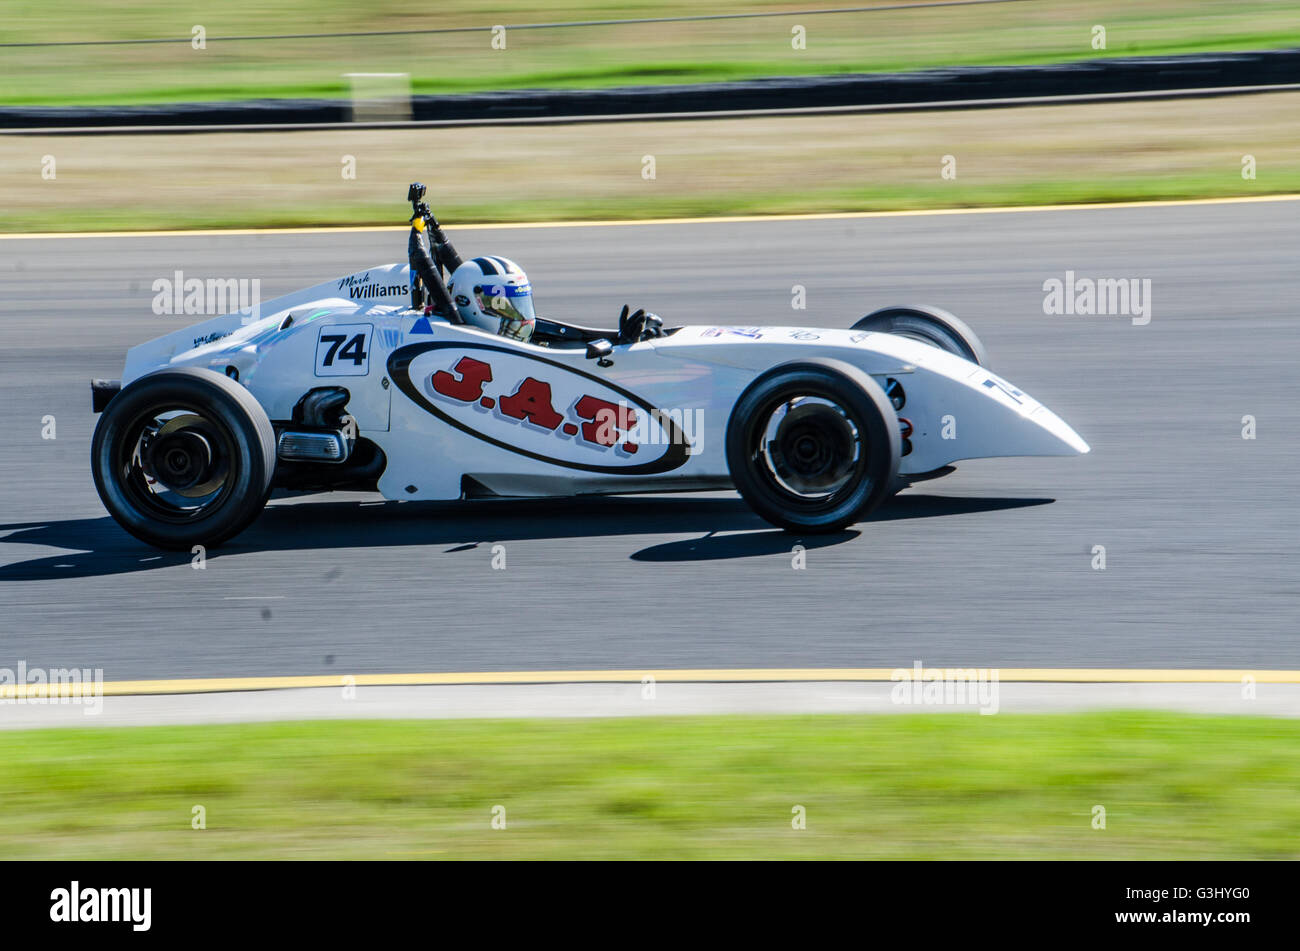 Day 2 of the New South Wales Motor Race Championships Round 2 featured a wide variety of racing including Supersports, Sports Sedans, Formula Cars, Improved Production, Formaula Vee and the Veloce Alfa. Pictured is Formula Vee racing. (Photo by Mitchell Burke / Pacific Press) Stock Photo